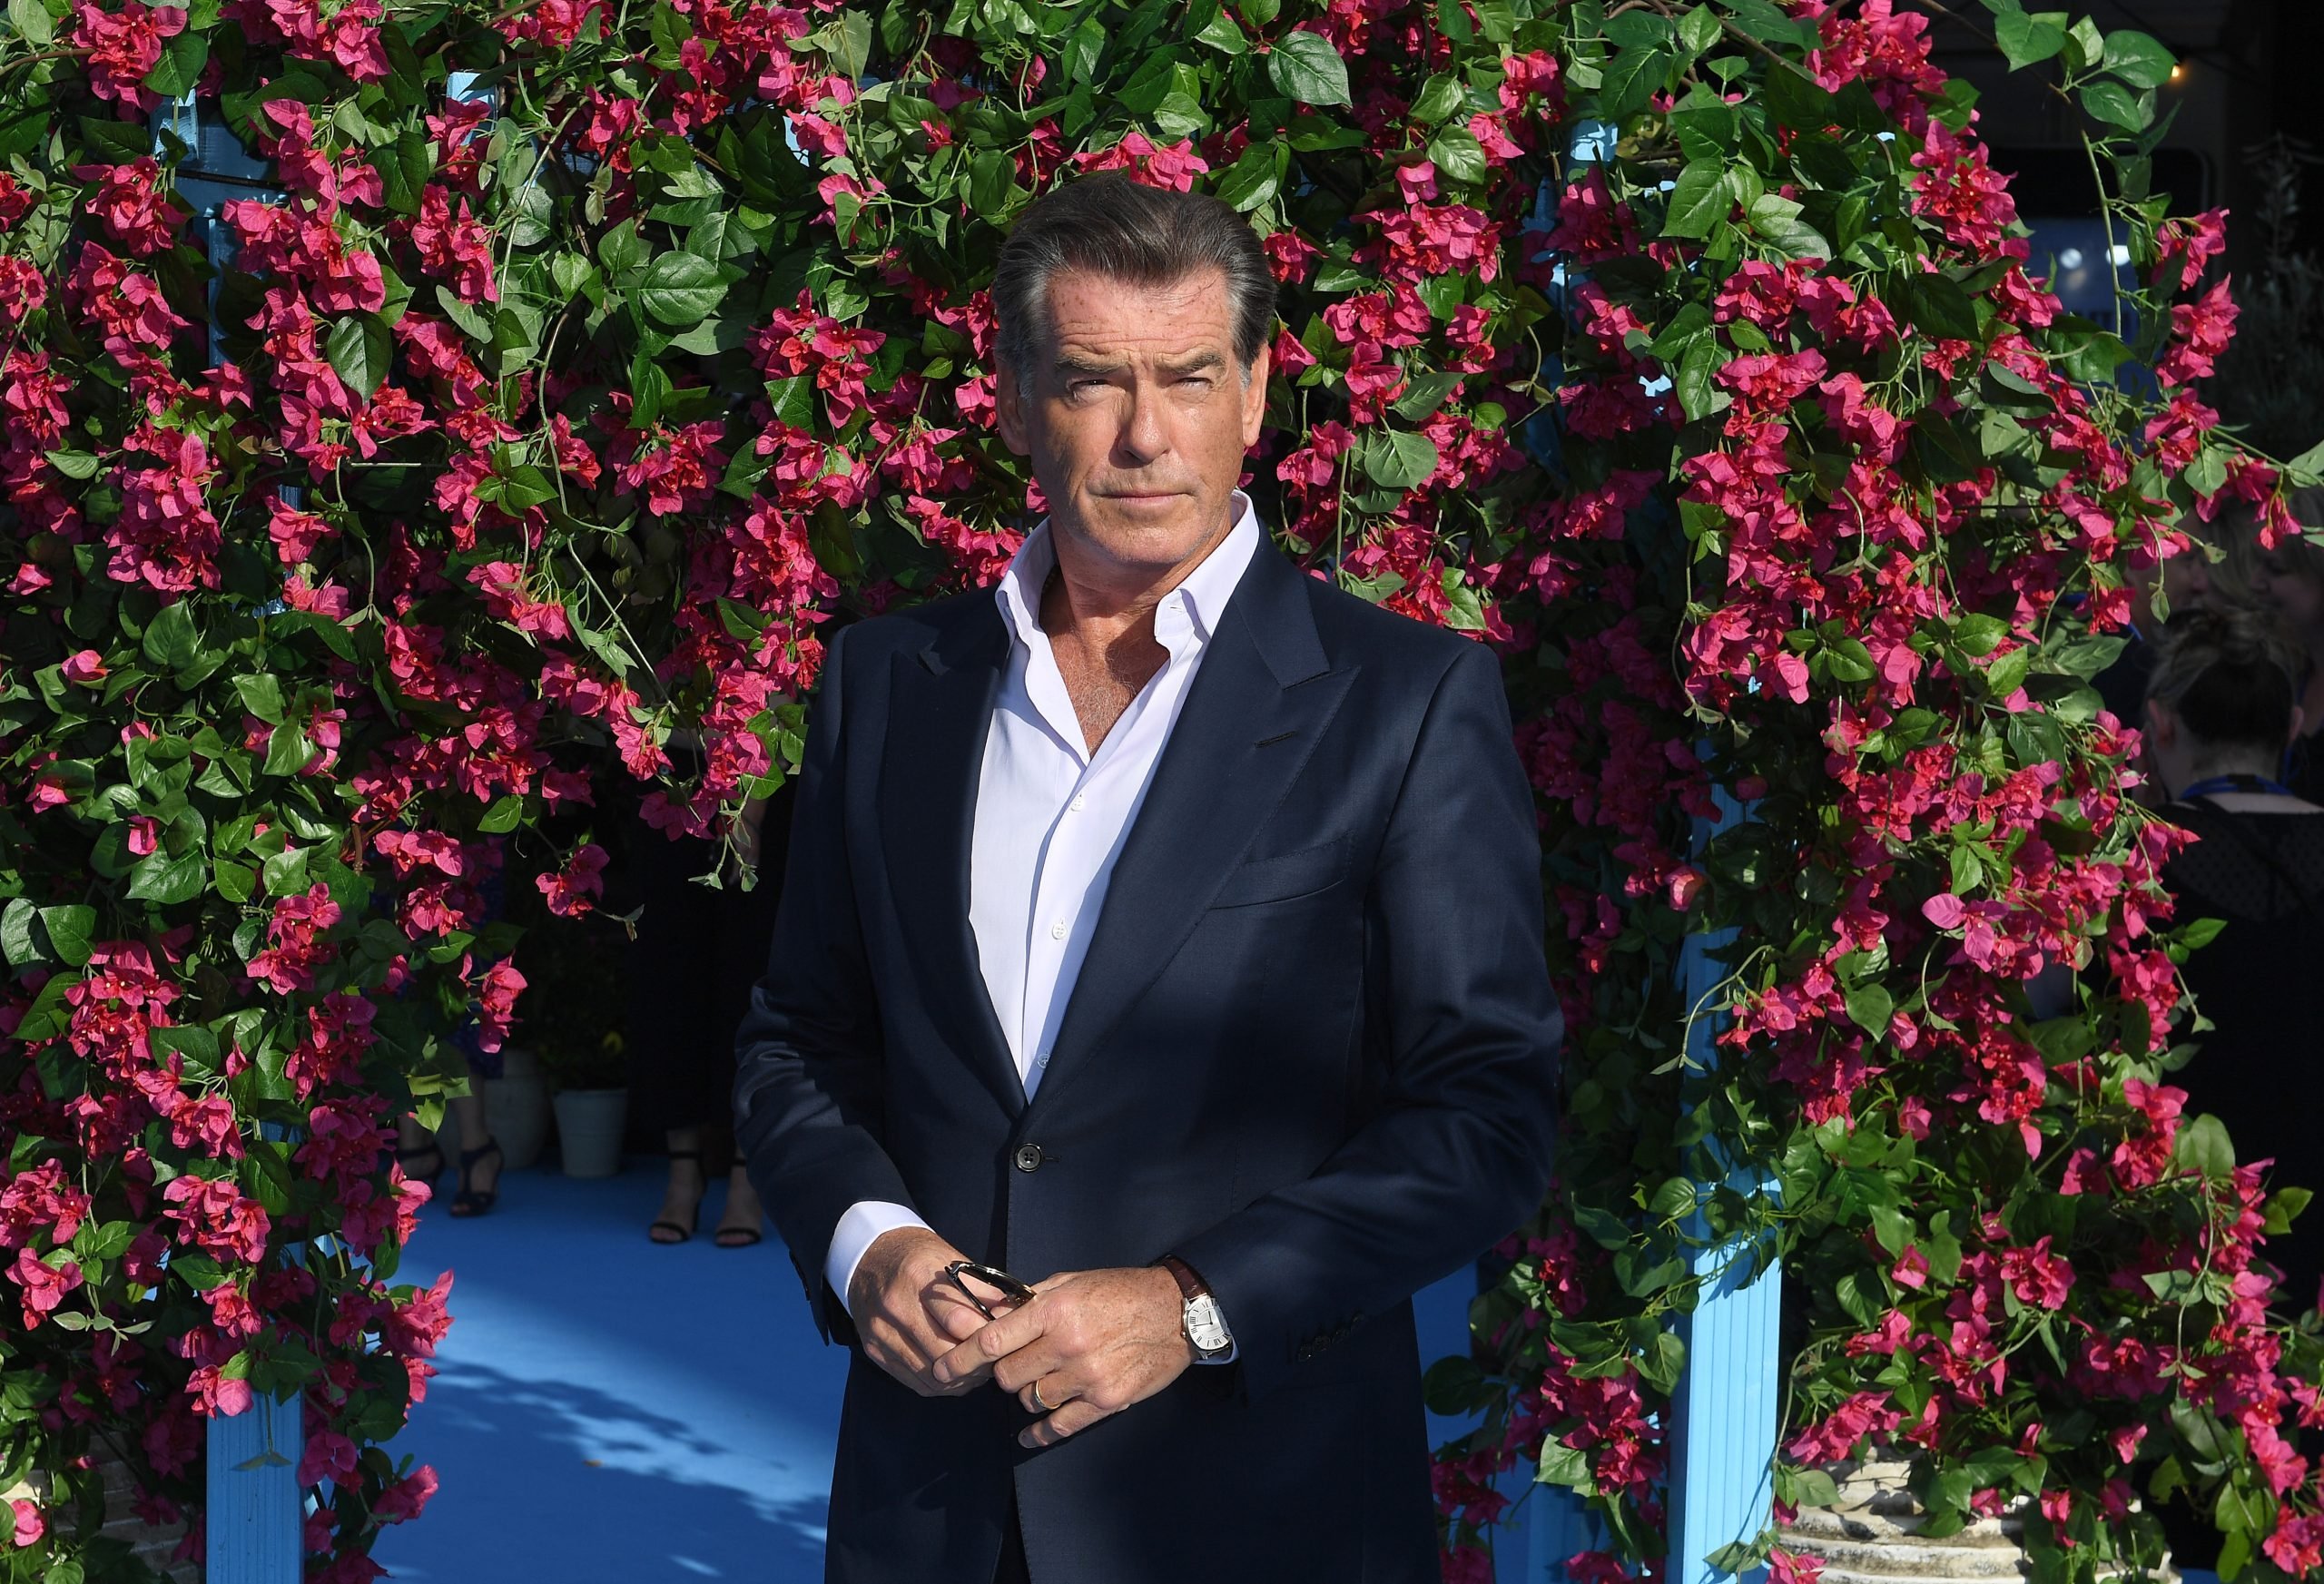 Pierce Brosnan on L.A. Art Exhibition – The Hollywood Reporter